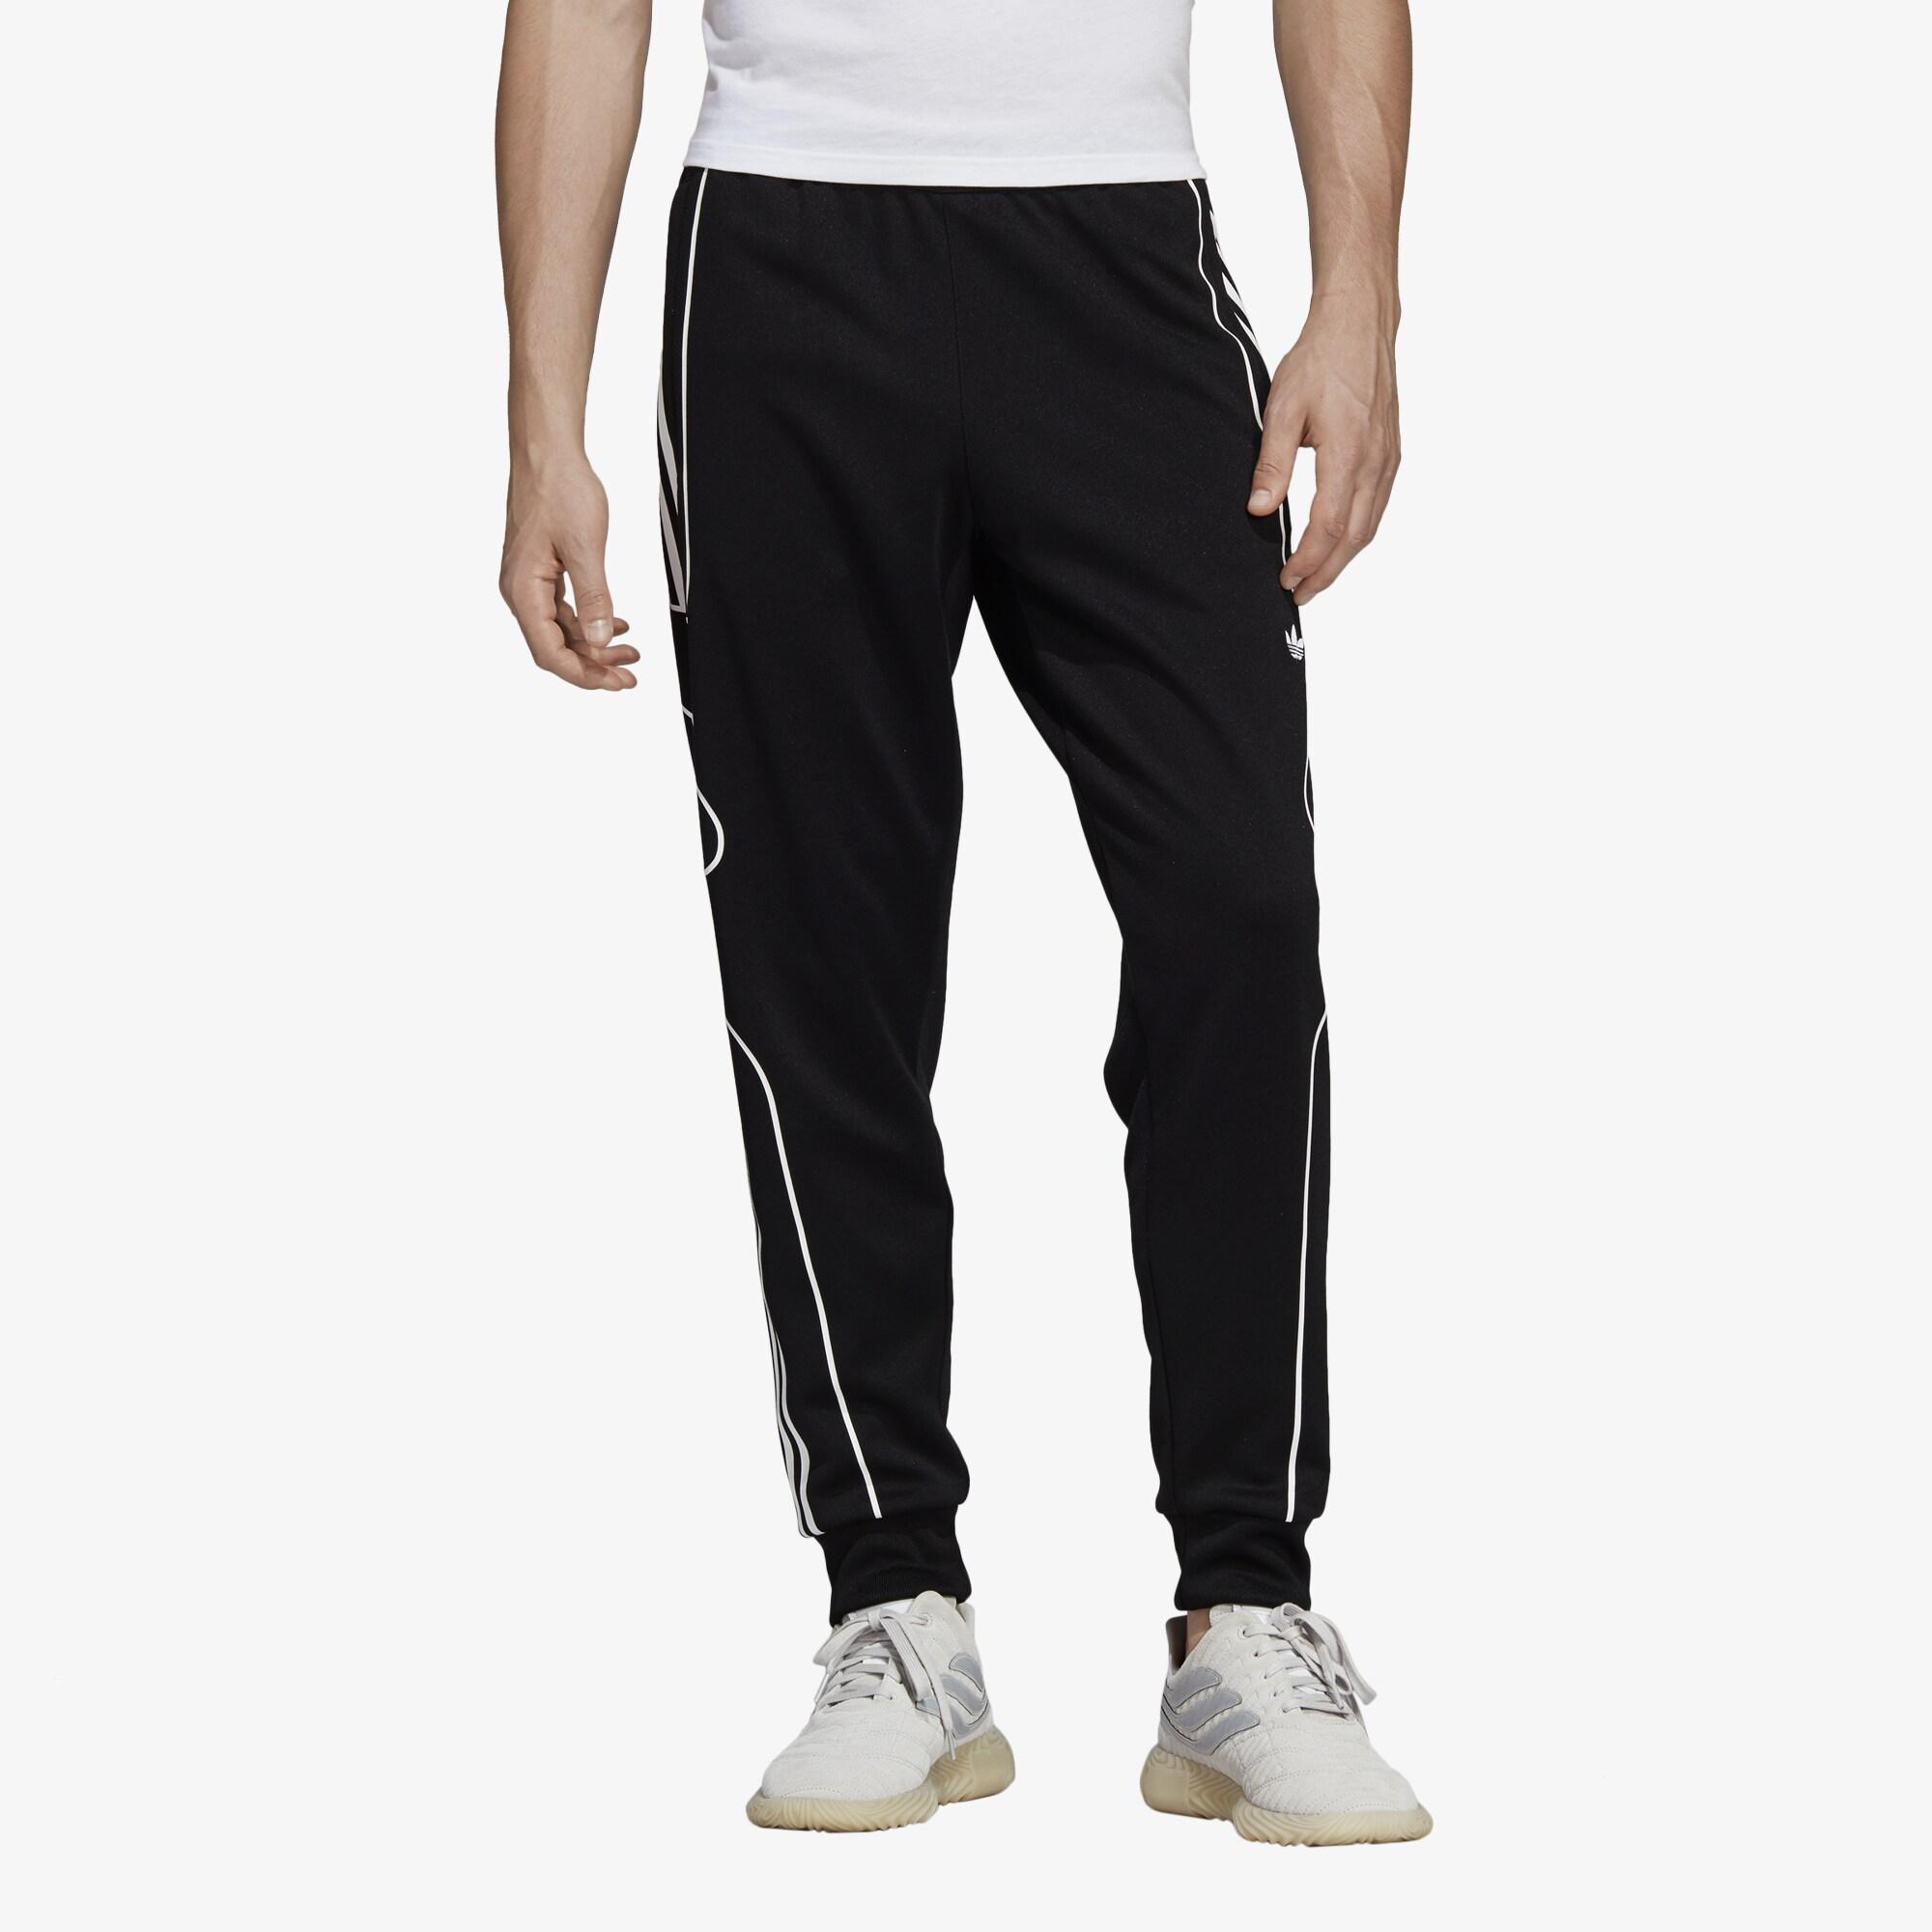 adidas flamestrike track pants all in high quality and low price